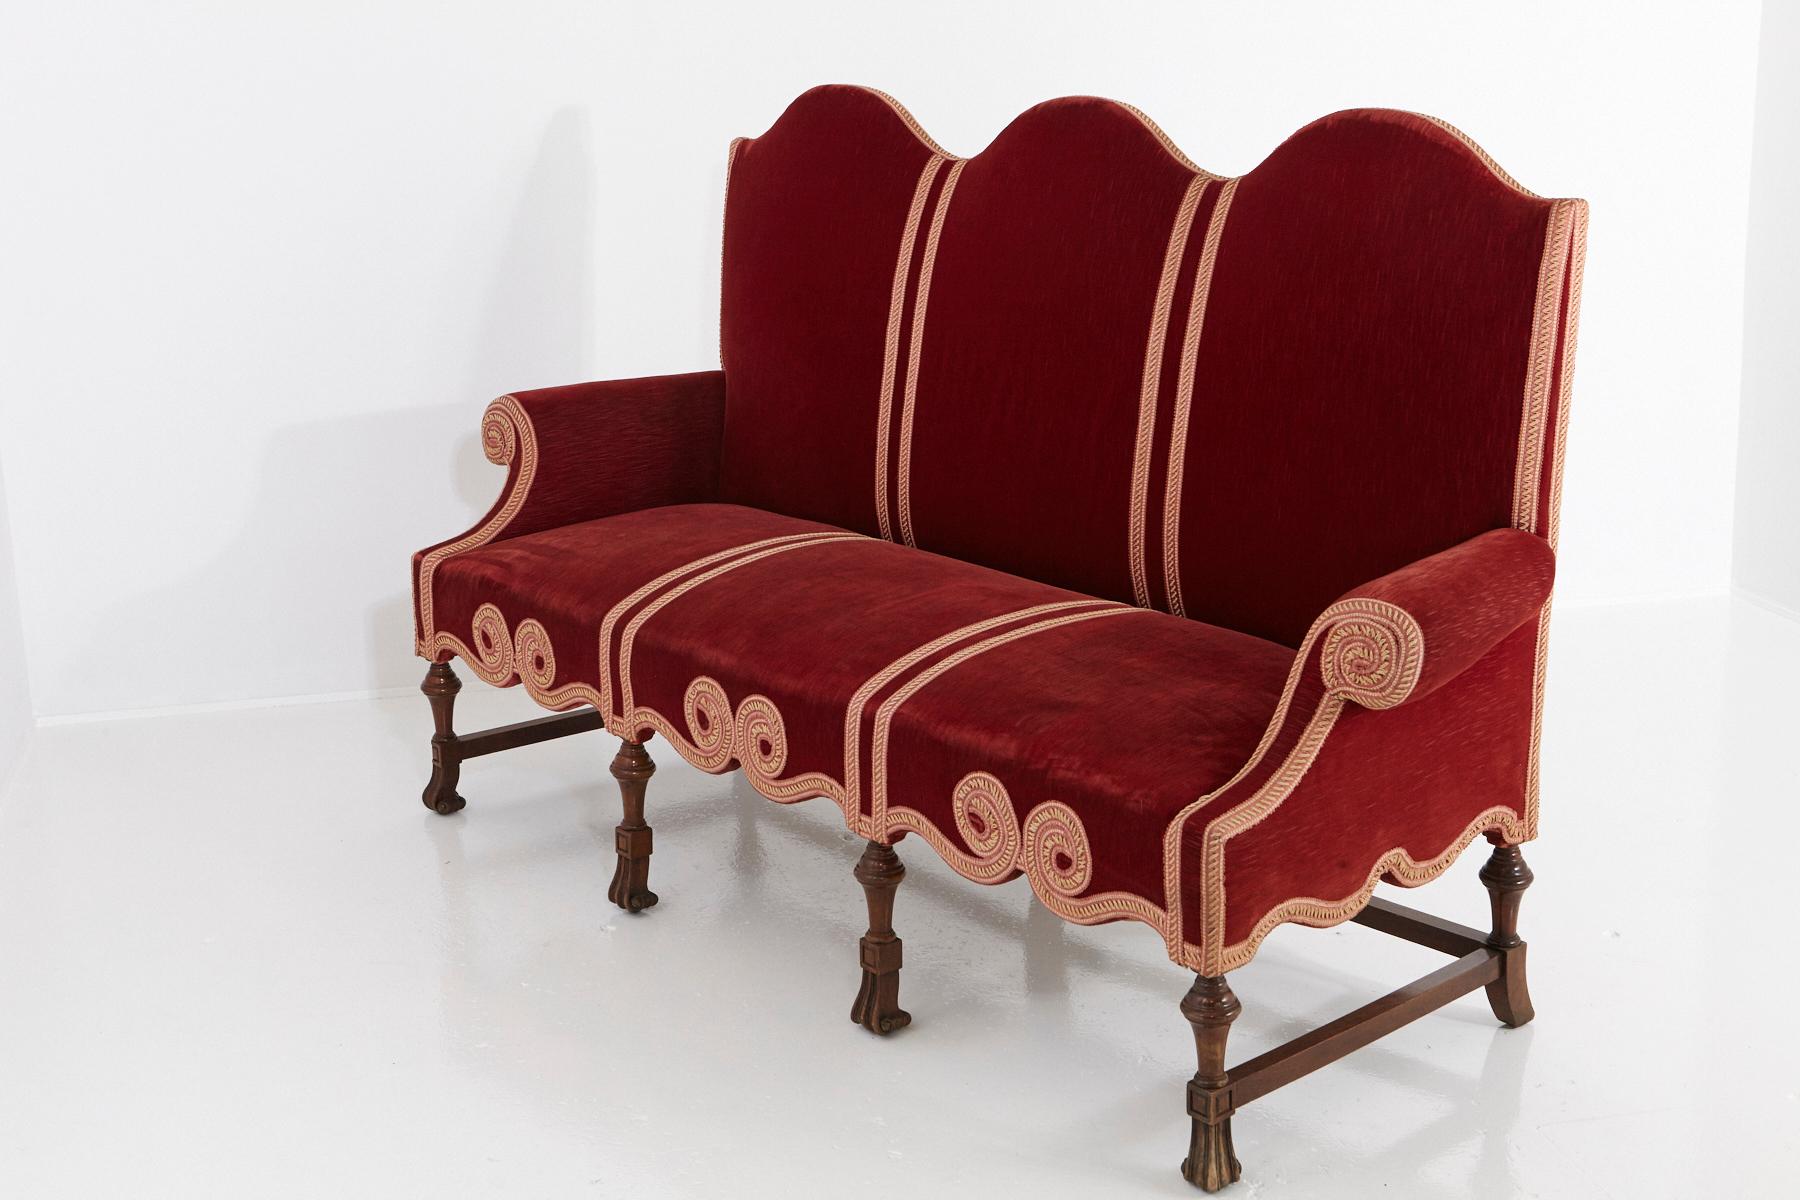 Late 19th century Victorian long seat sofa with scrolled arms and camelback upholstered in red striae velvet, with gild embroidered piping ribbons, creating a graphic pattern and scrolled elements, mounted on carved legs with scrolled feet and side